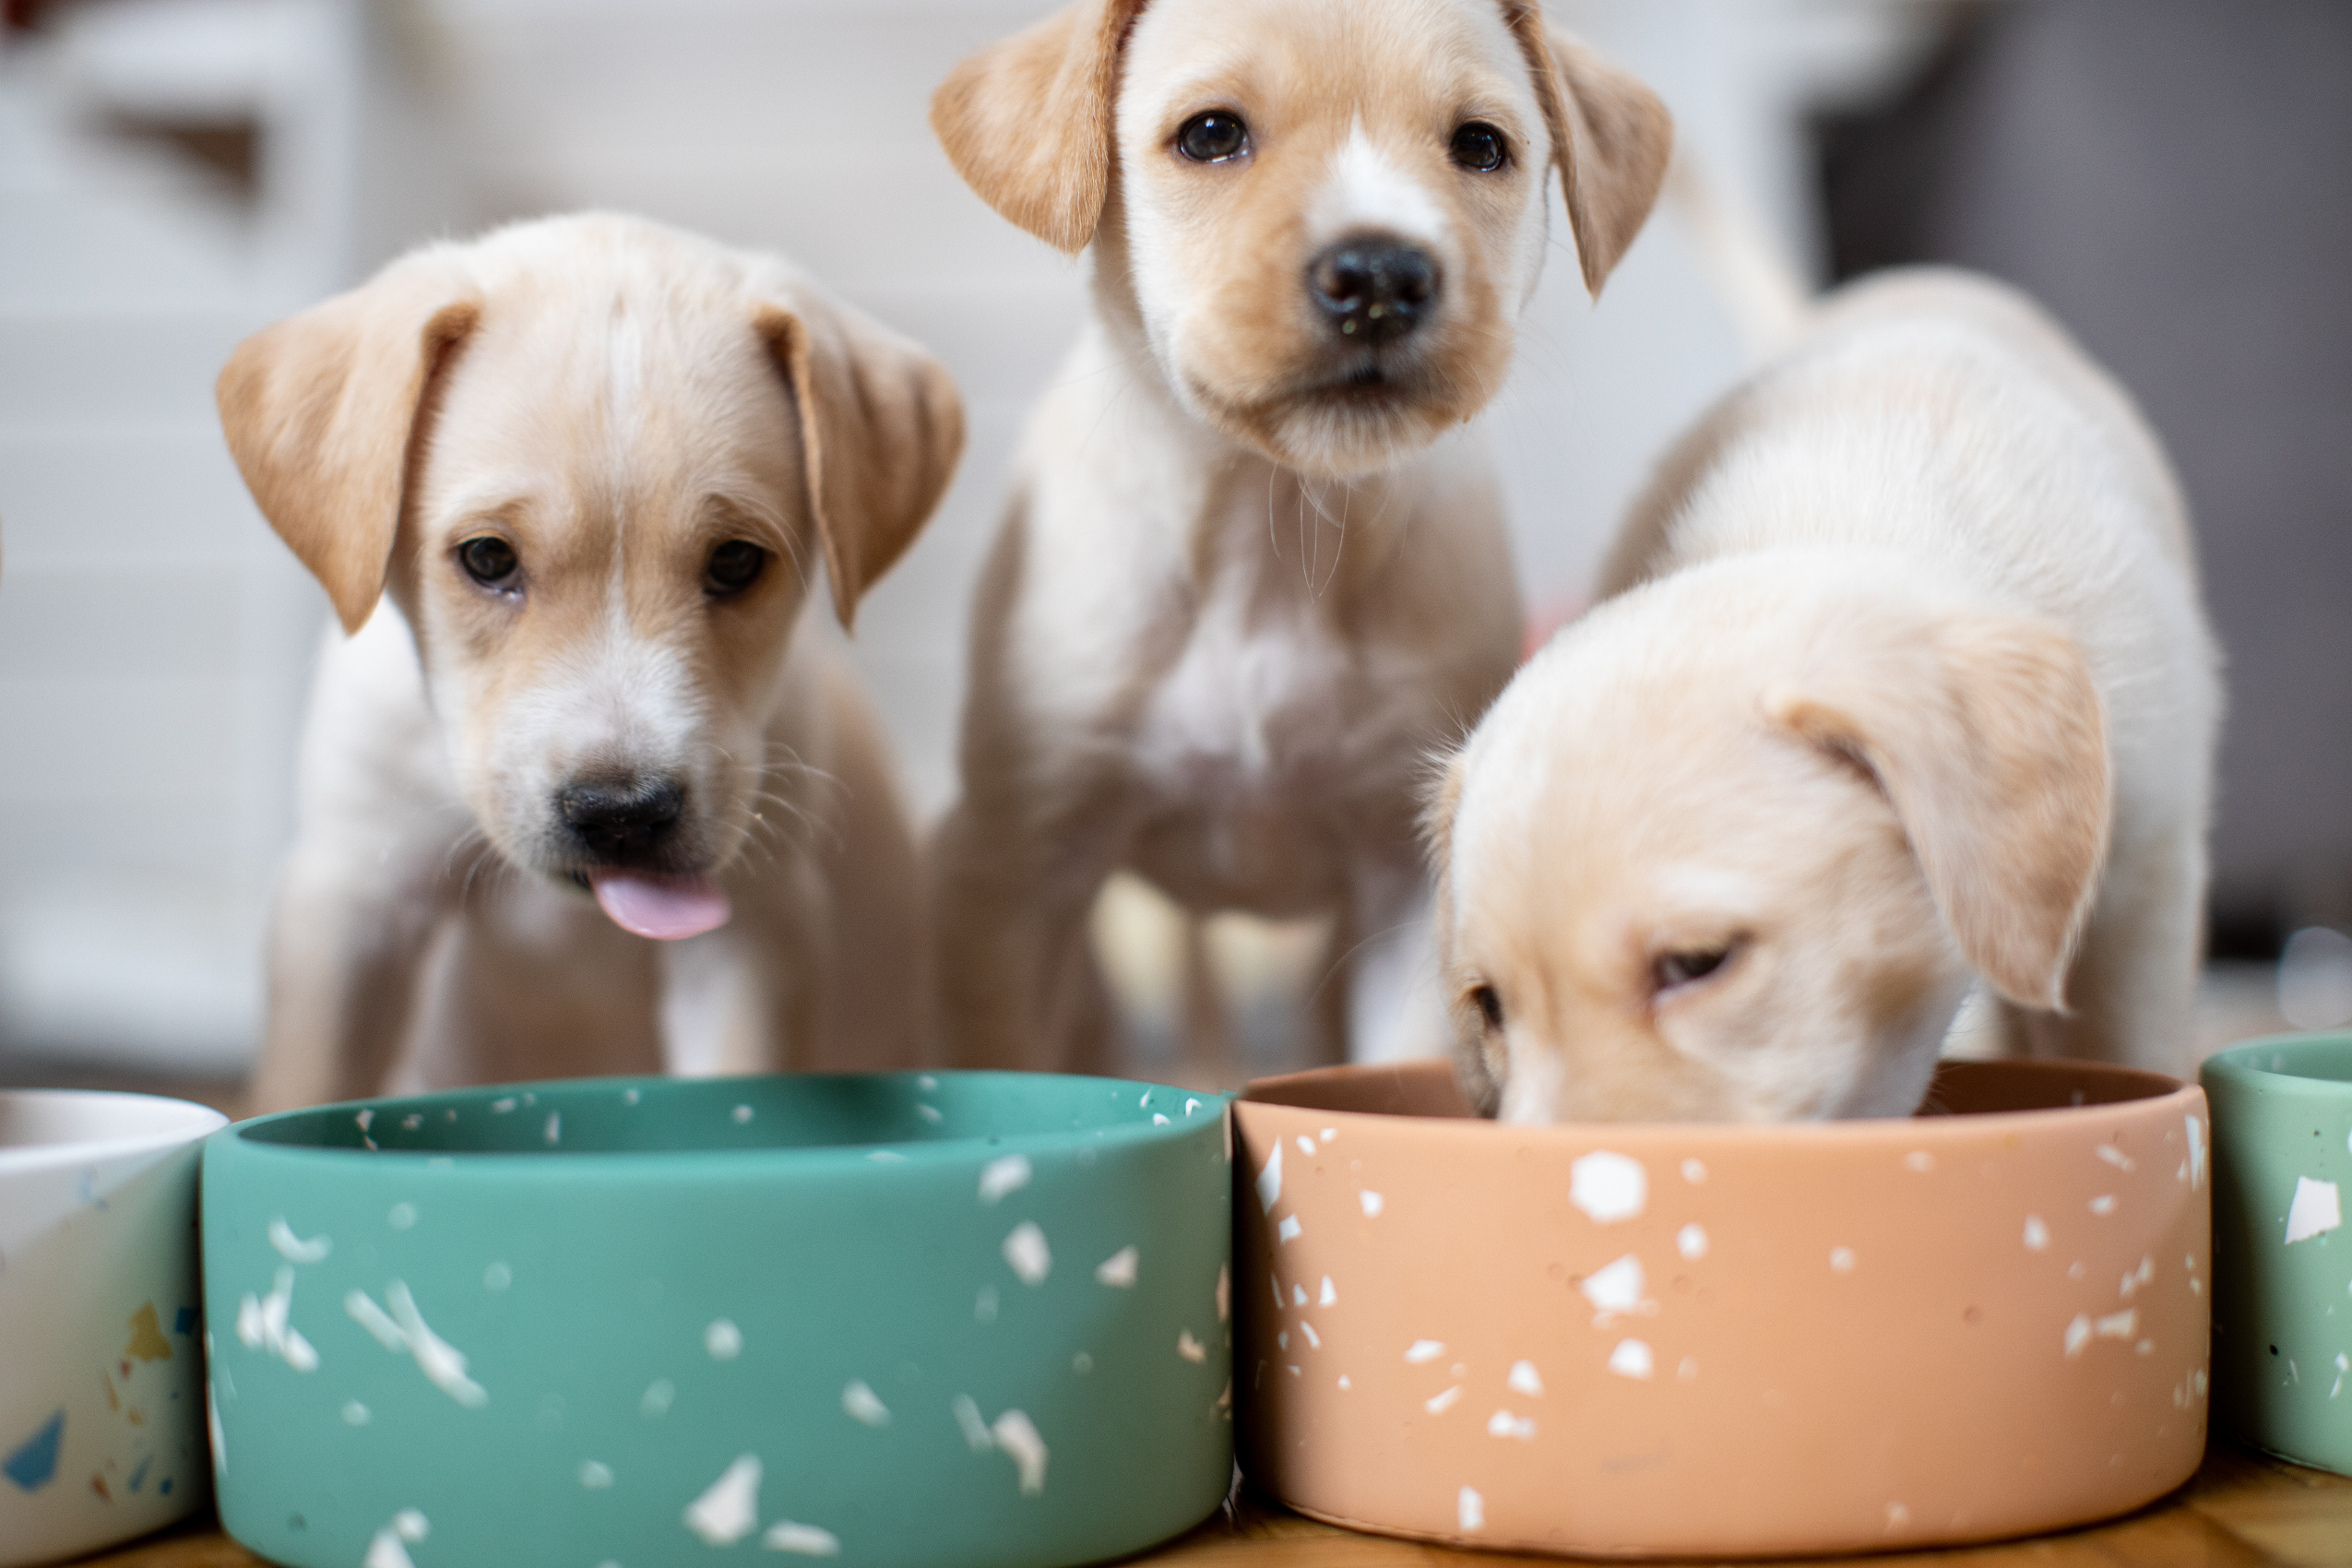 Flawed study into vegan diets for dogs puts pets at risk.